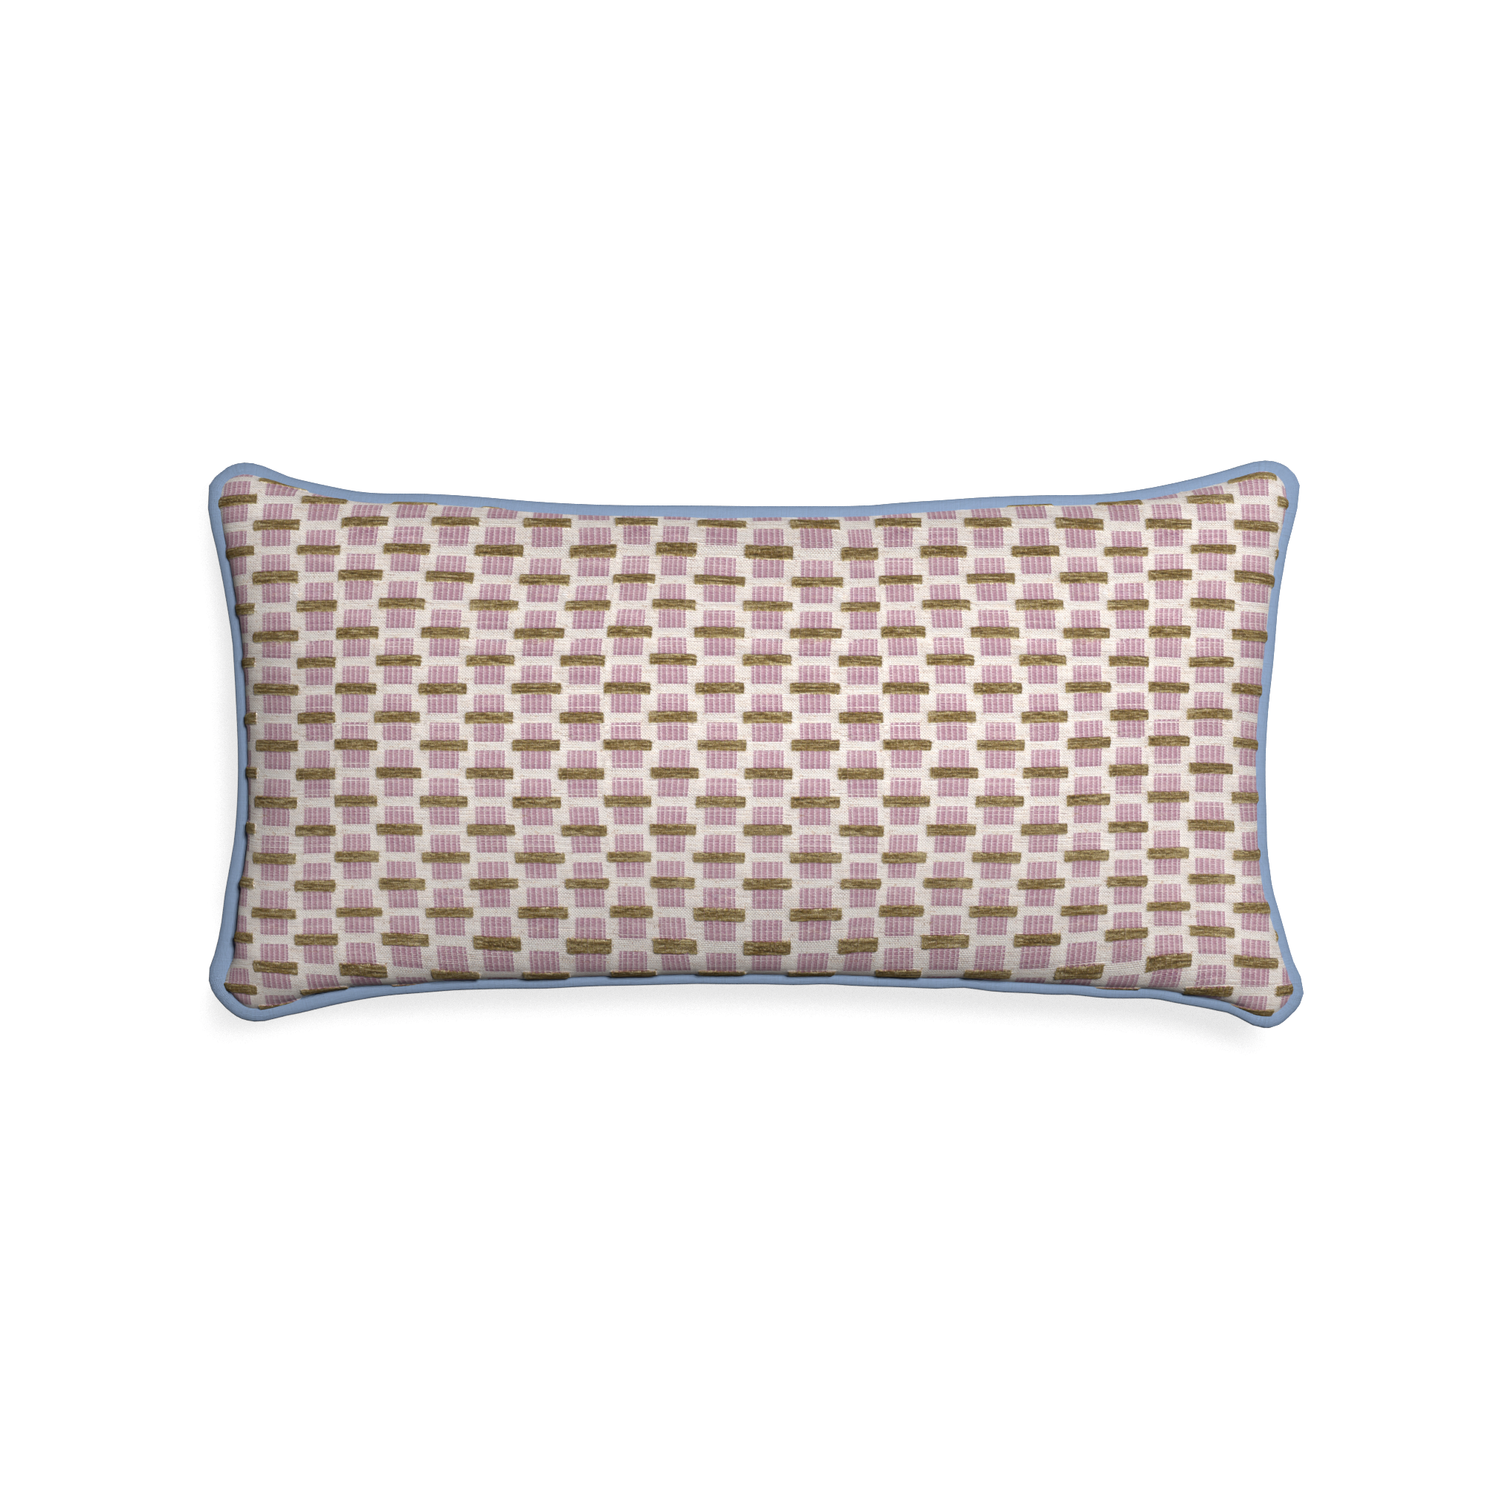 Midi-lumbar willow orchid custom pink geometric chenillepillow with sky piping on white background